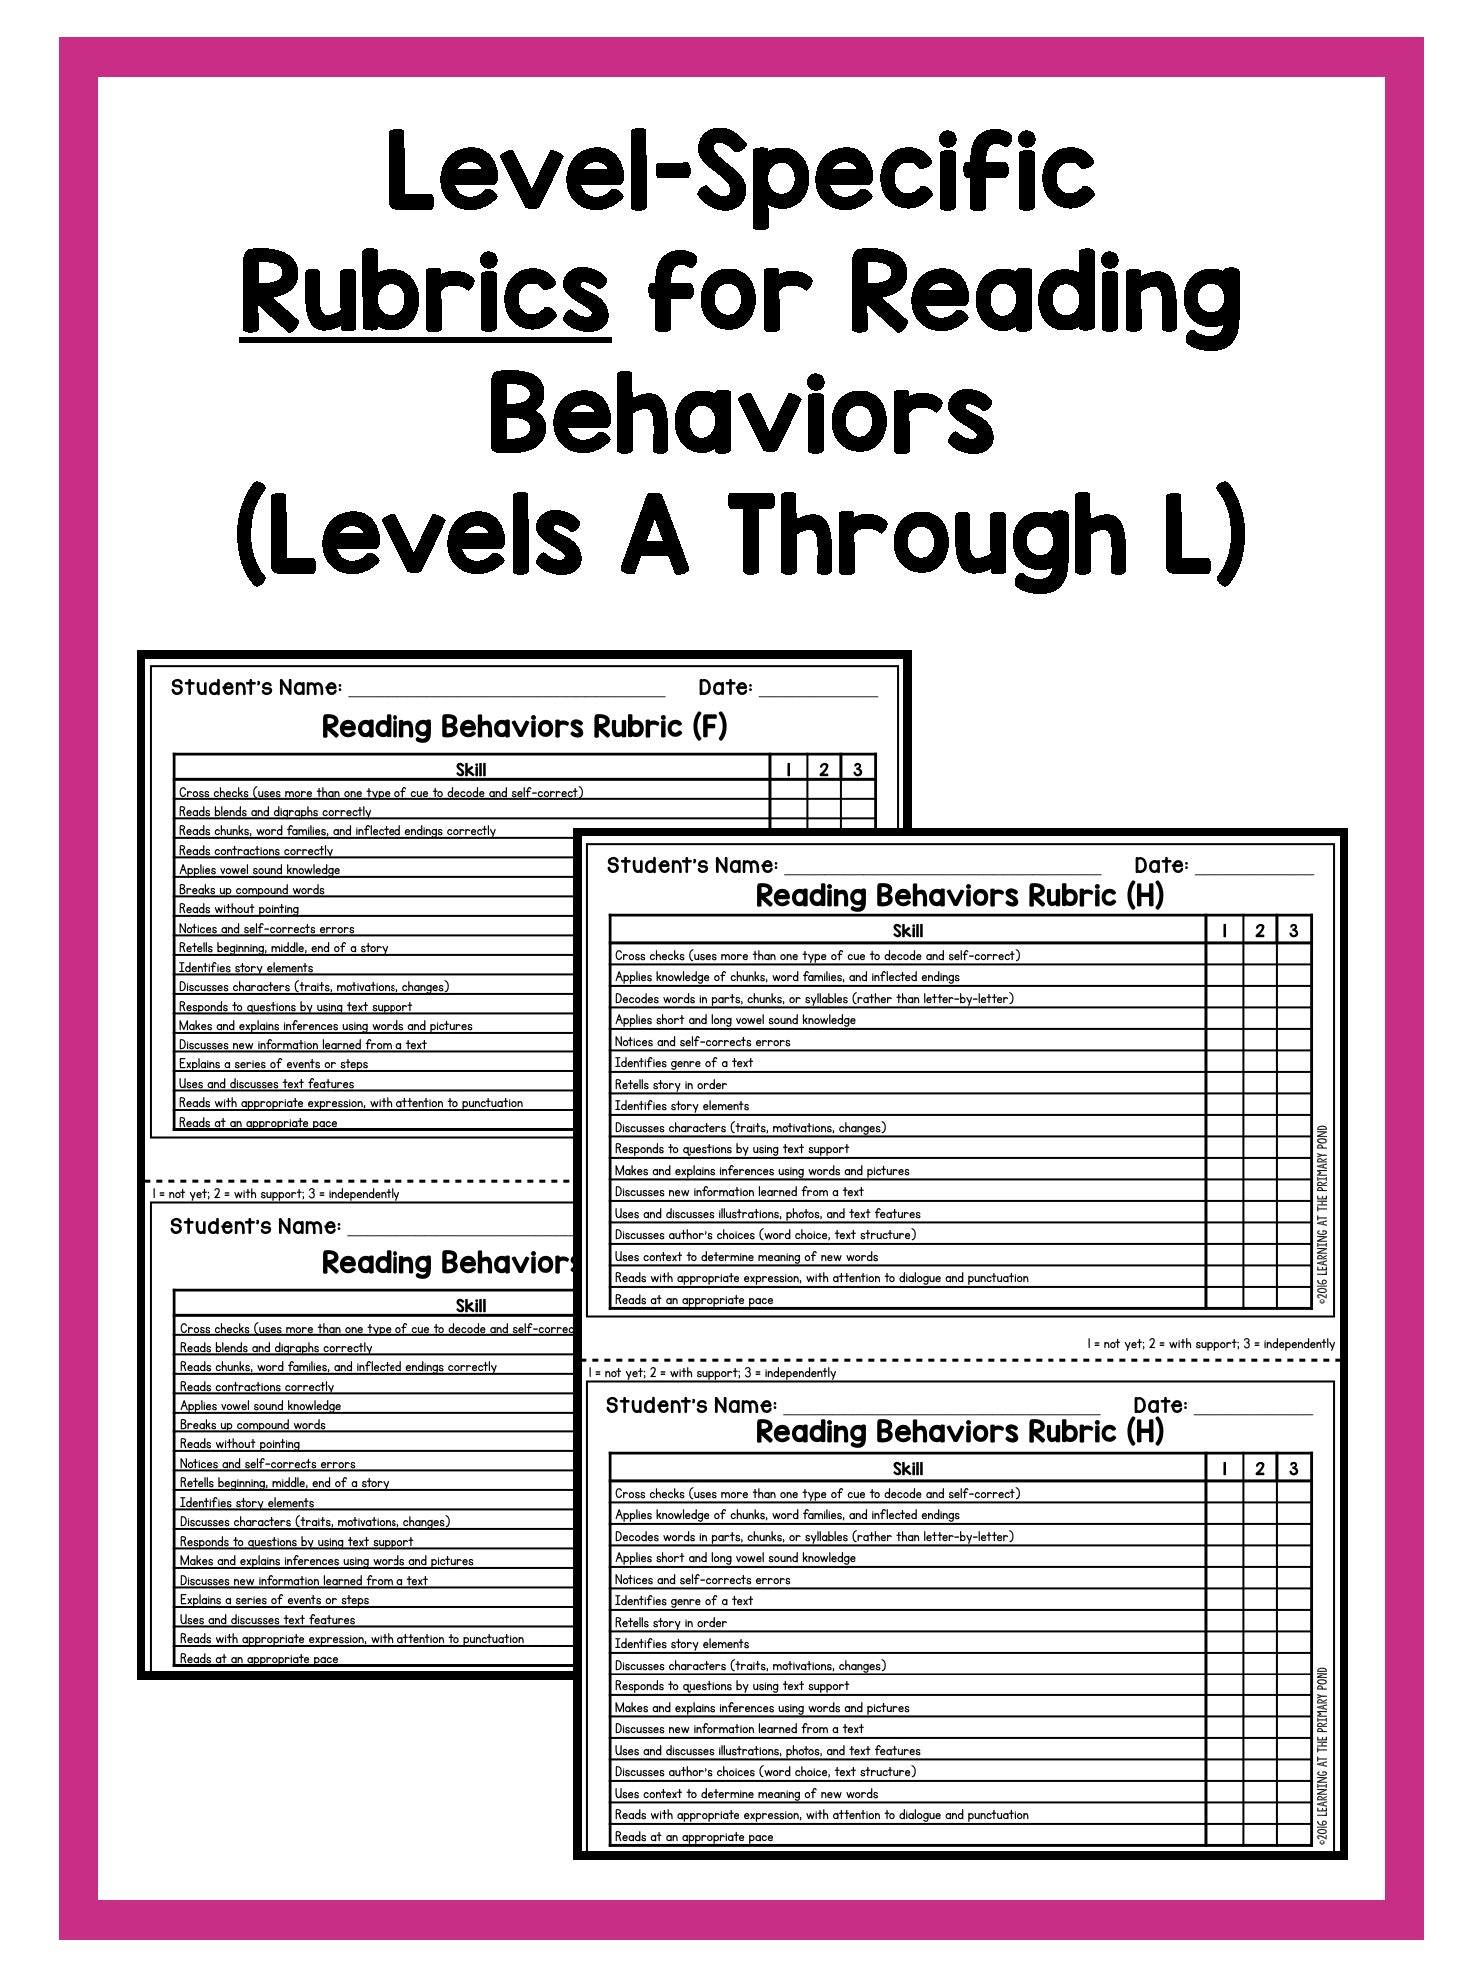 First Grade Guided Reading Checklists and Rubrics - learning-at-the-primary-pond